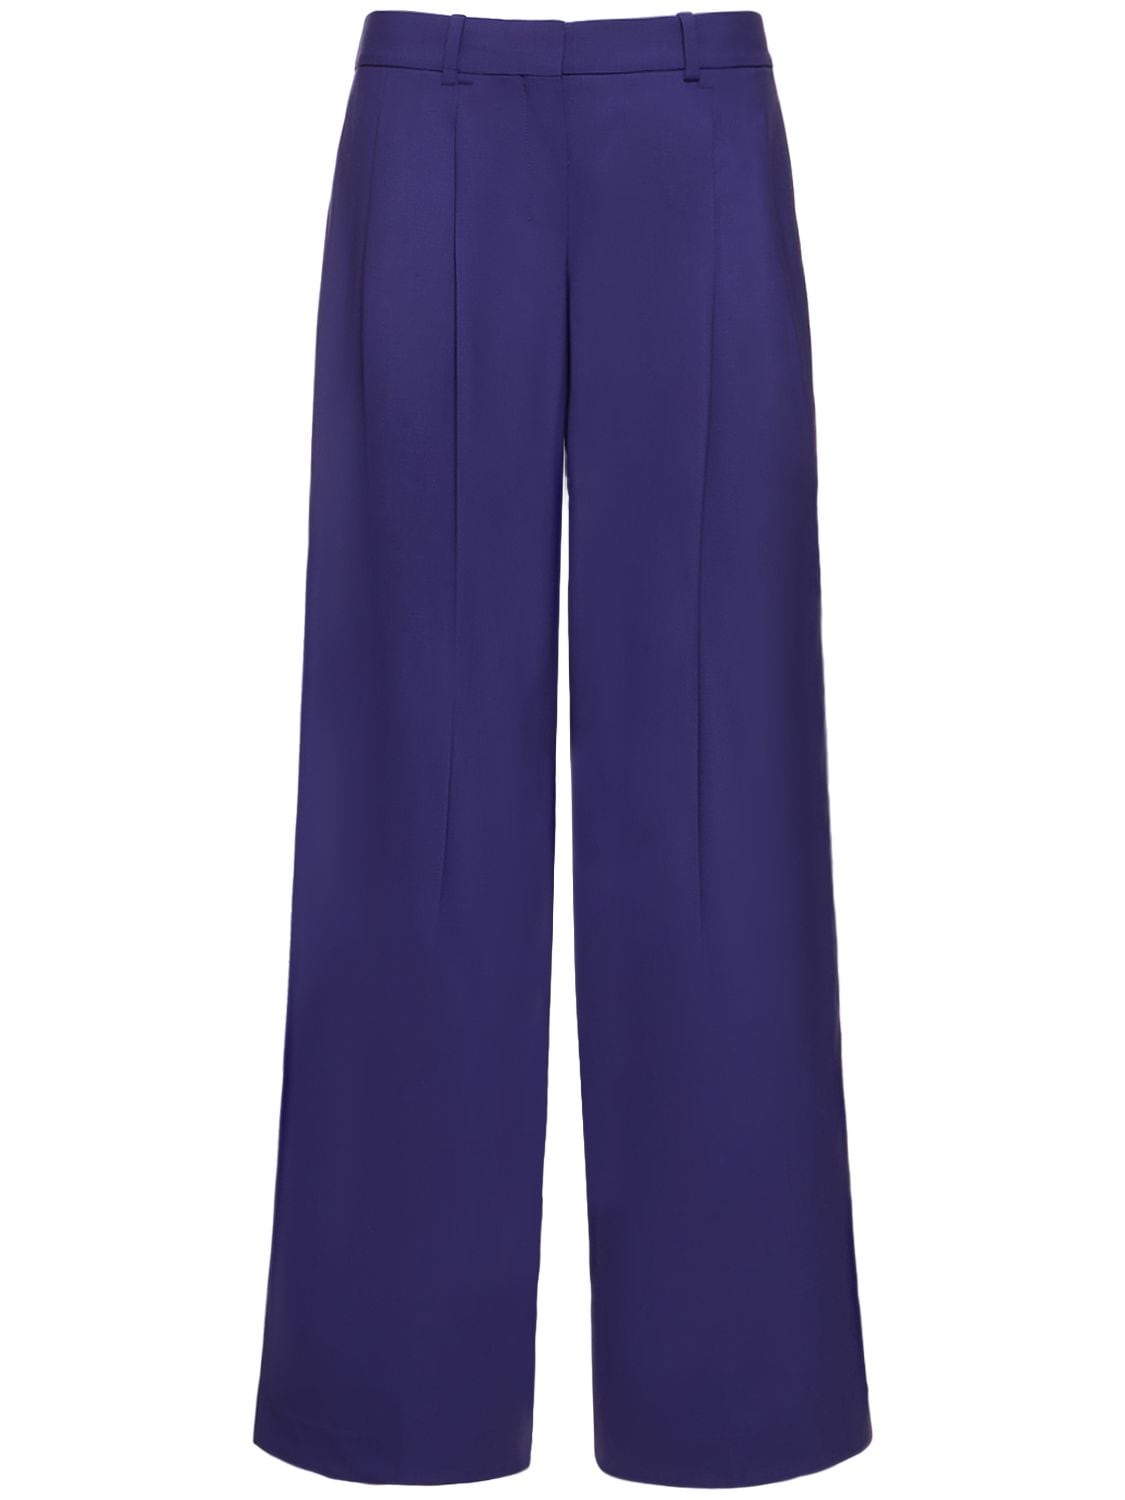 THEORY LOW RISE STRETCH WOOL trousers